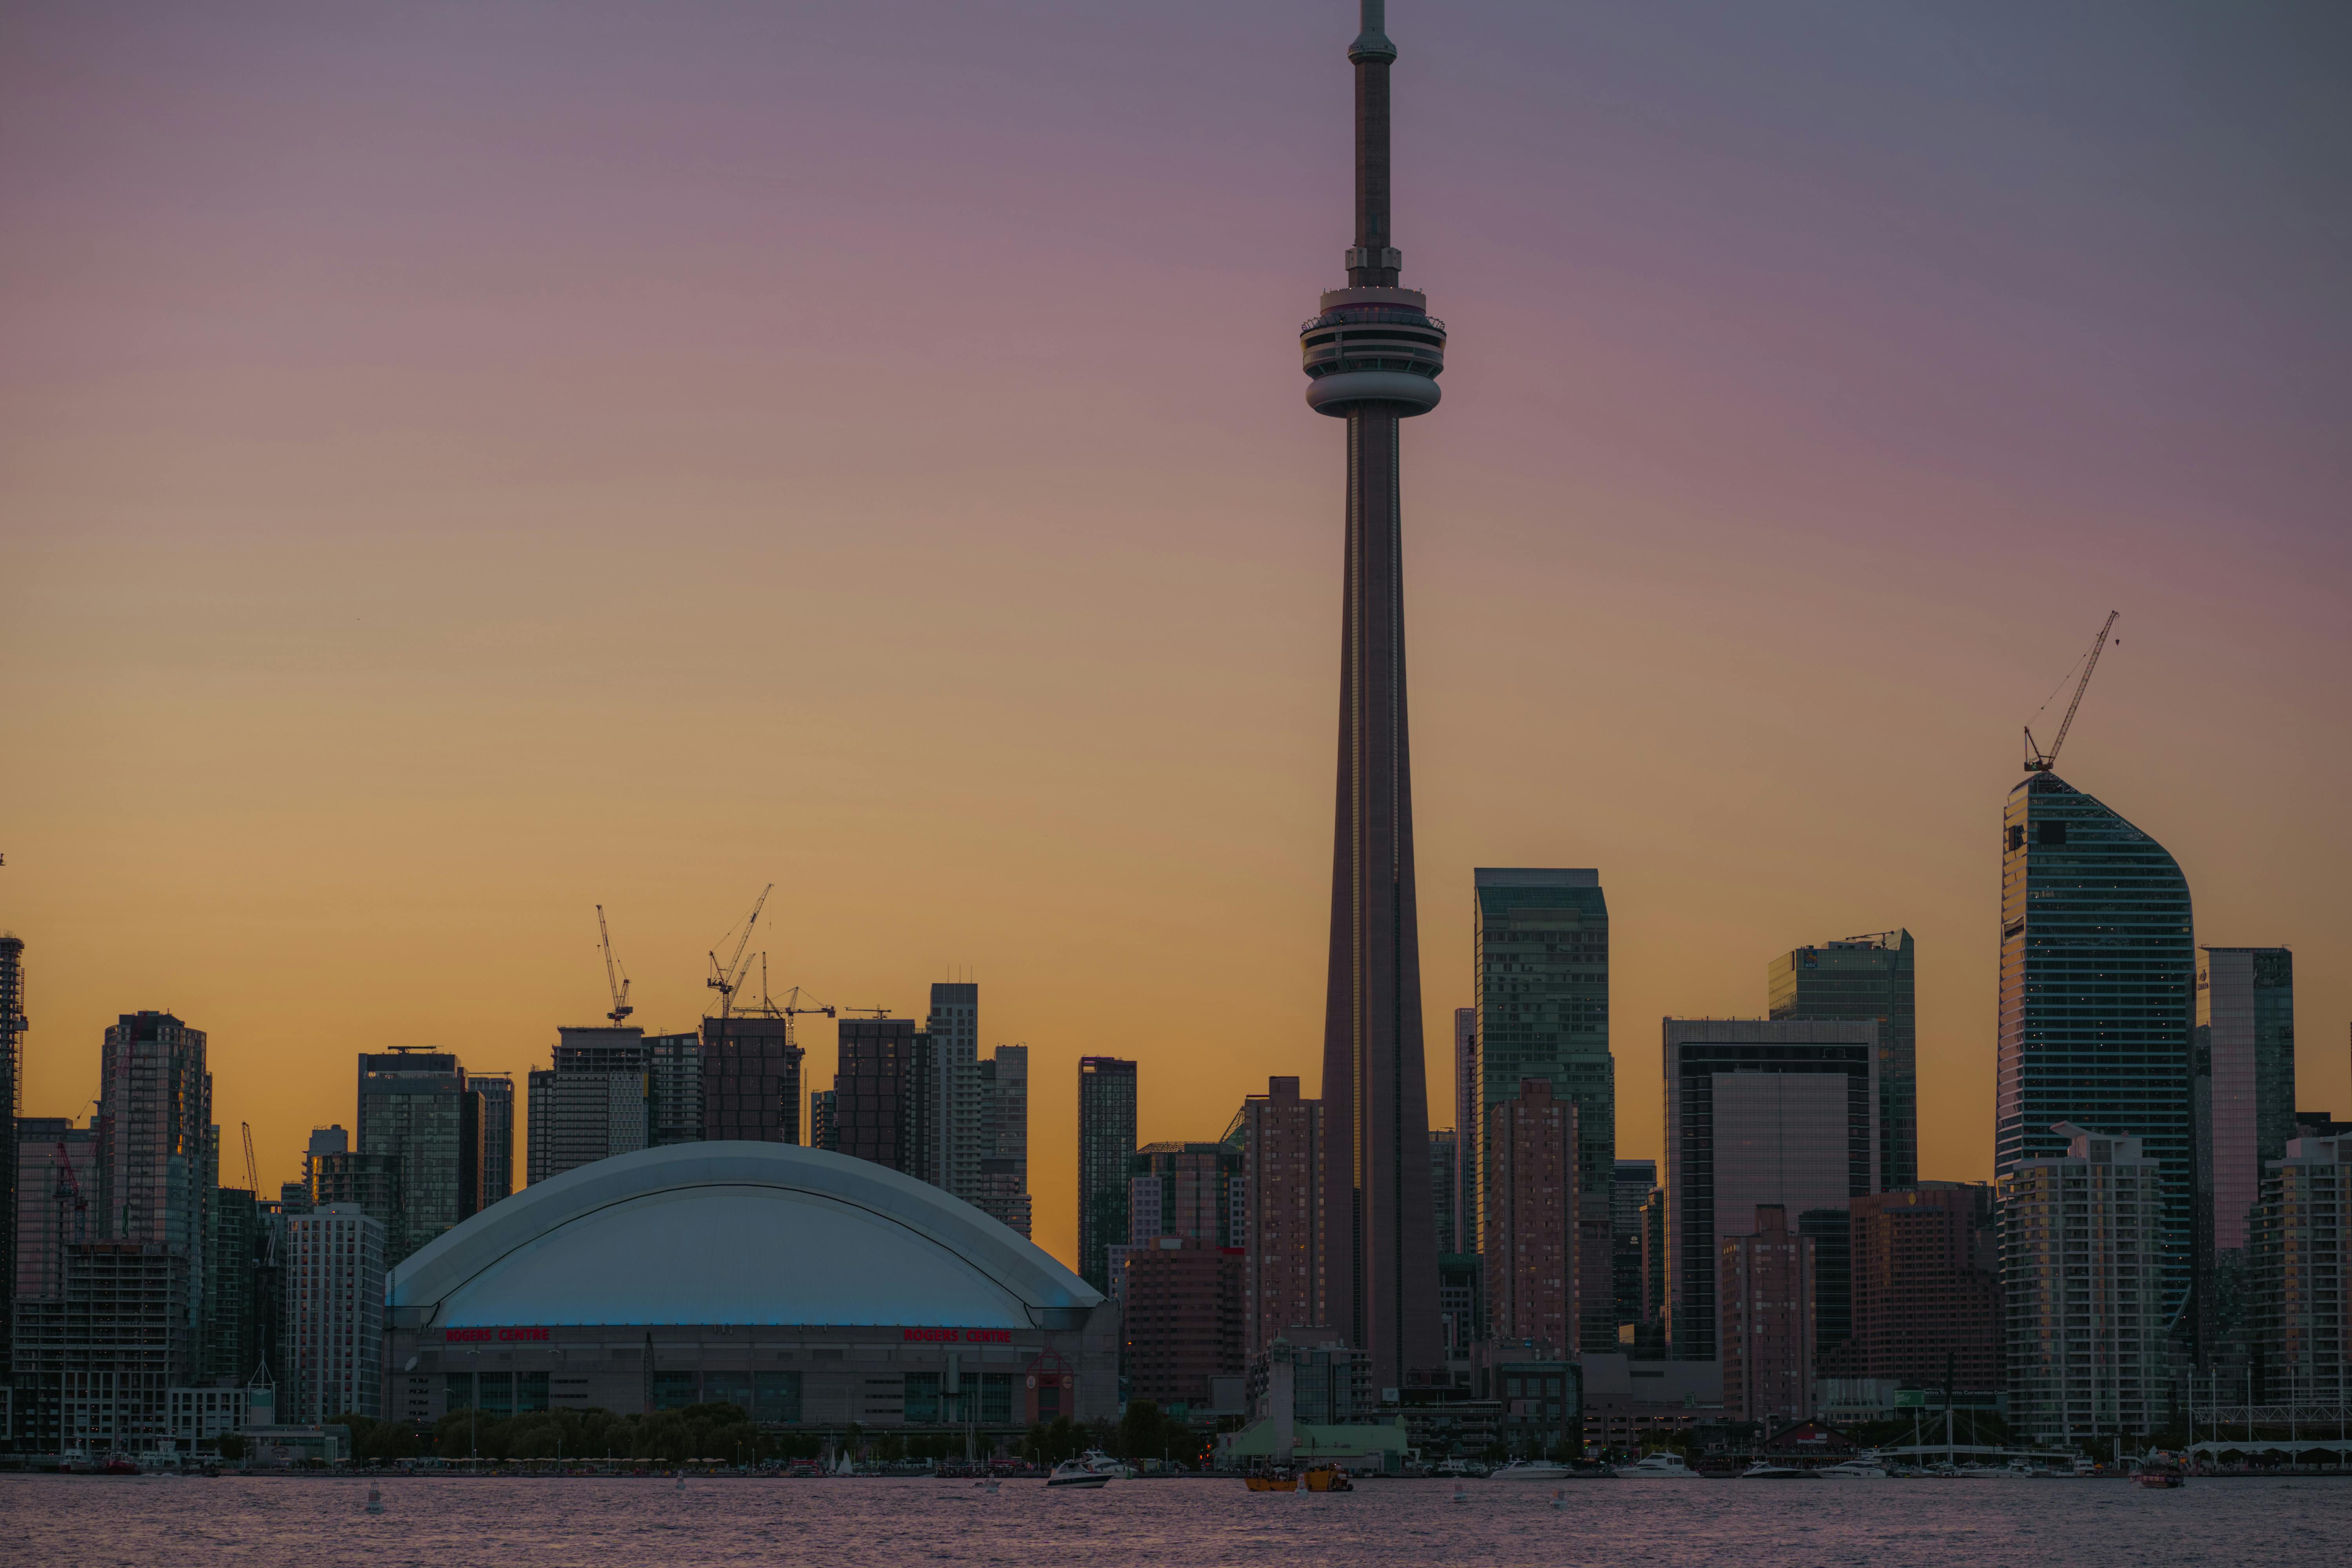 sunset view of cn tower from toronto island